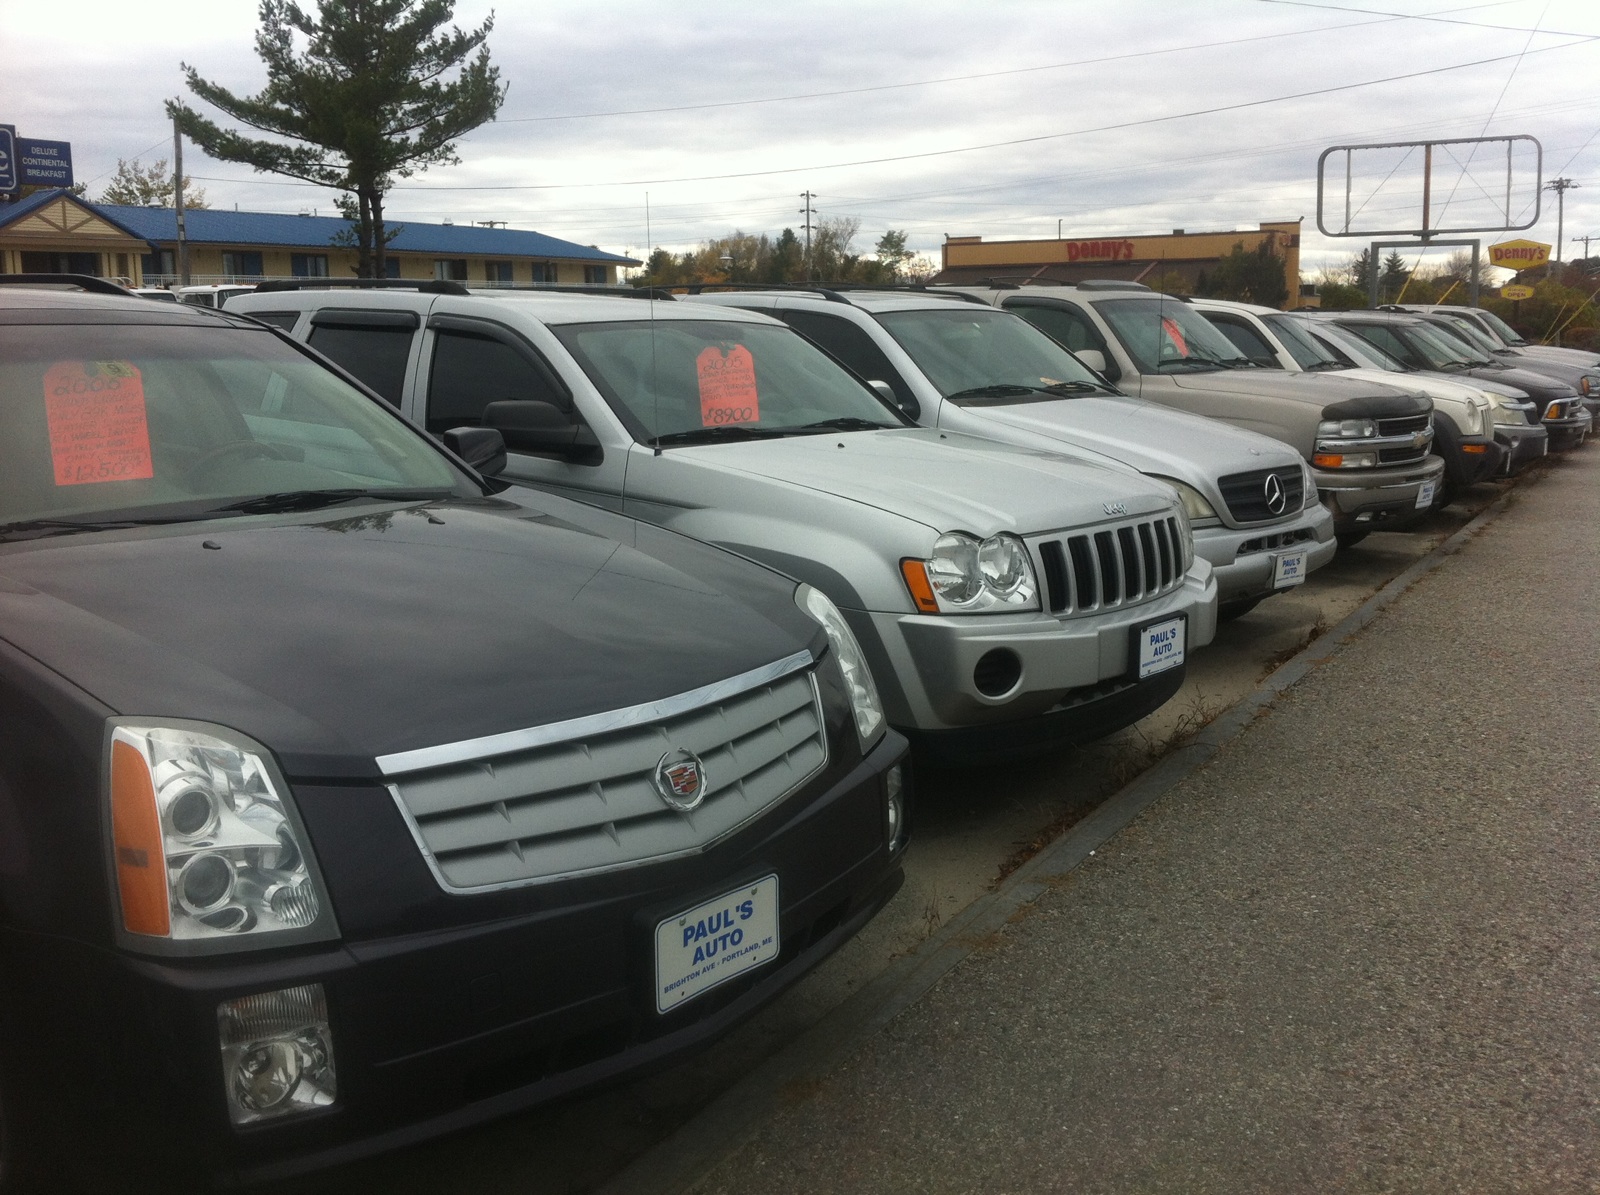 PAULS  AUTO  SALES, IF WE DONT HAVE IT, WE CAN GET IT FOR YOU !!! on paulsservicesinc.com